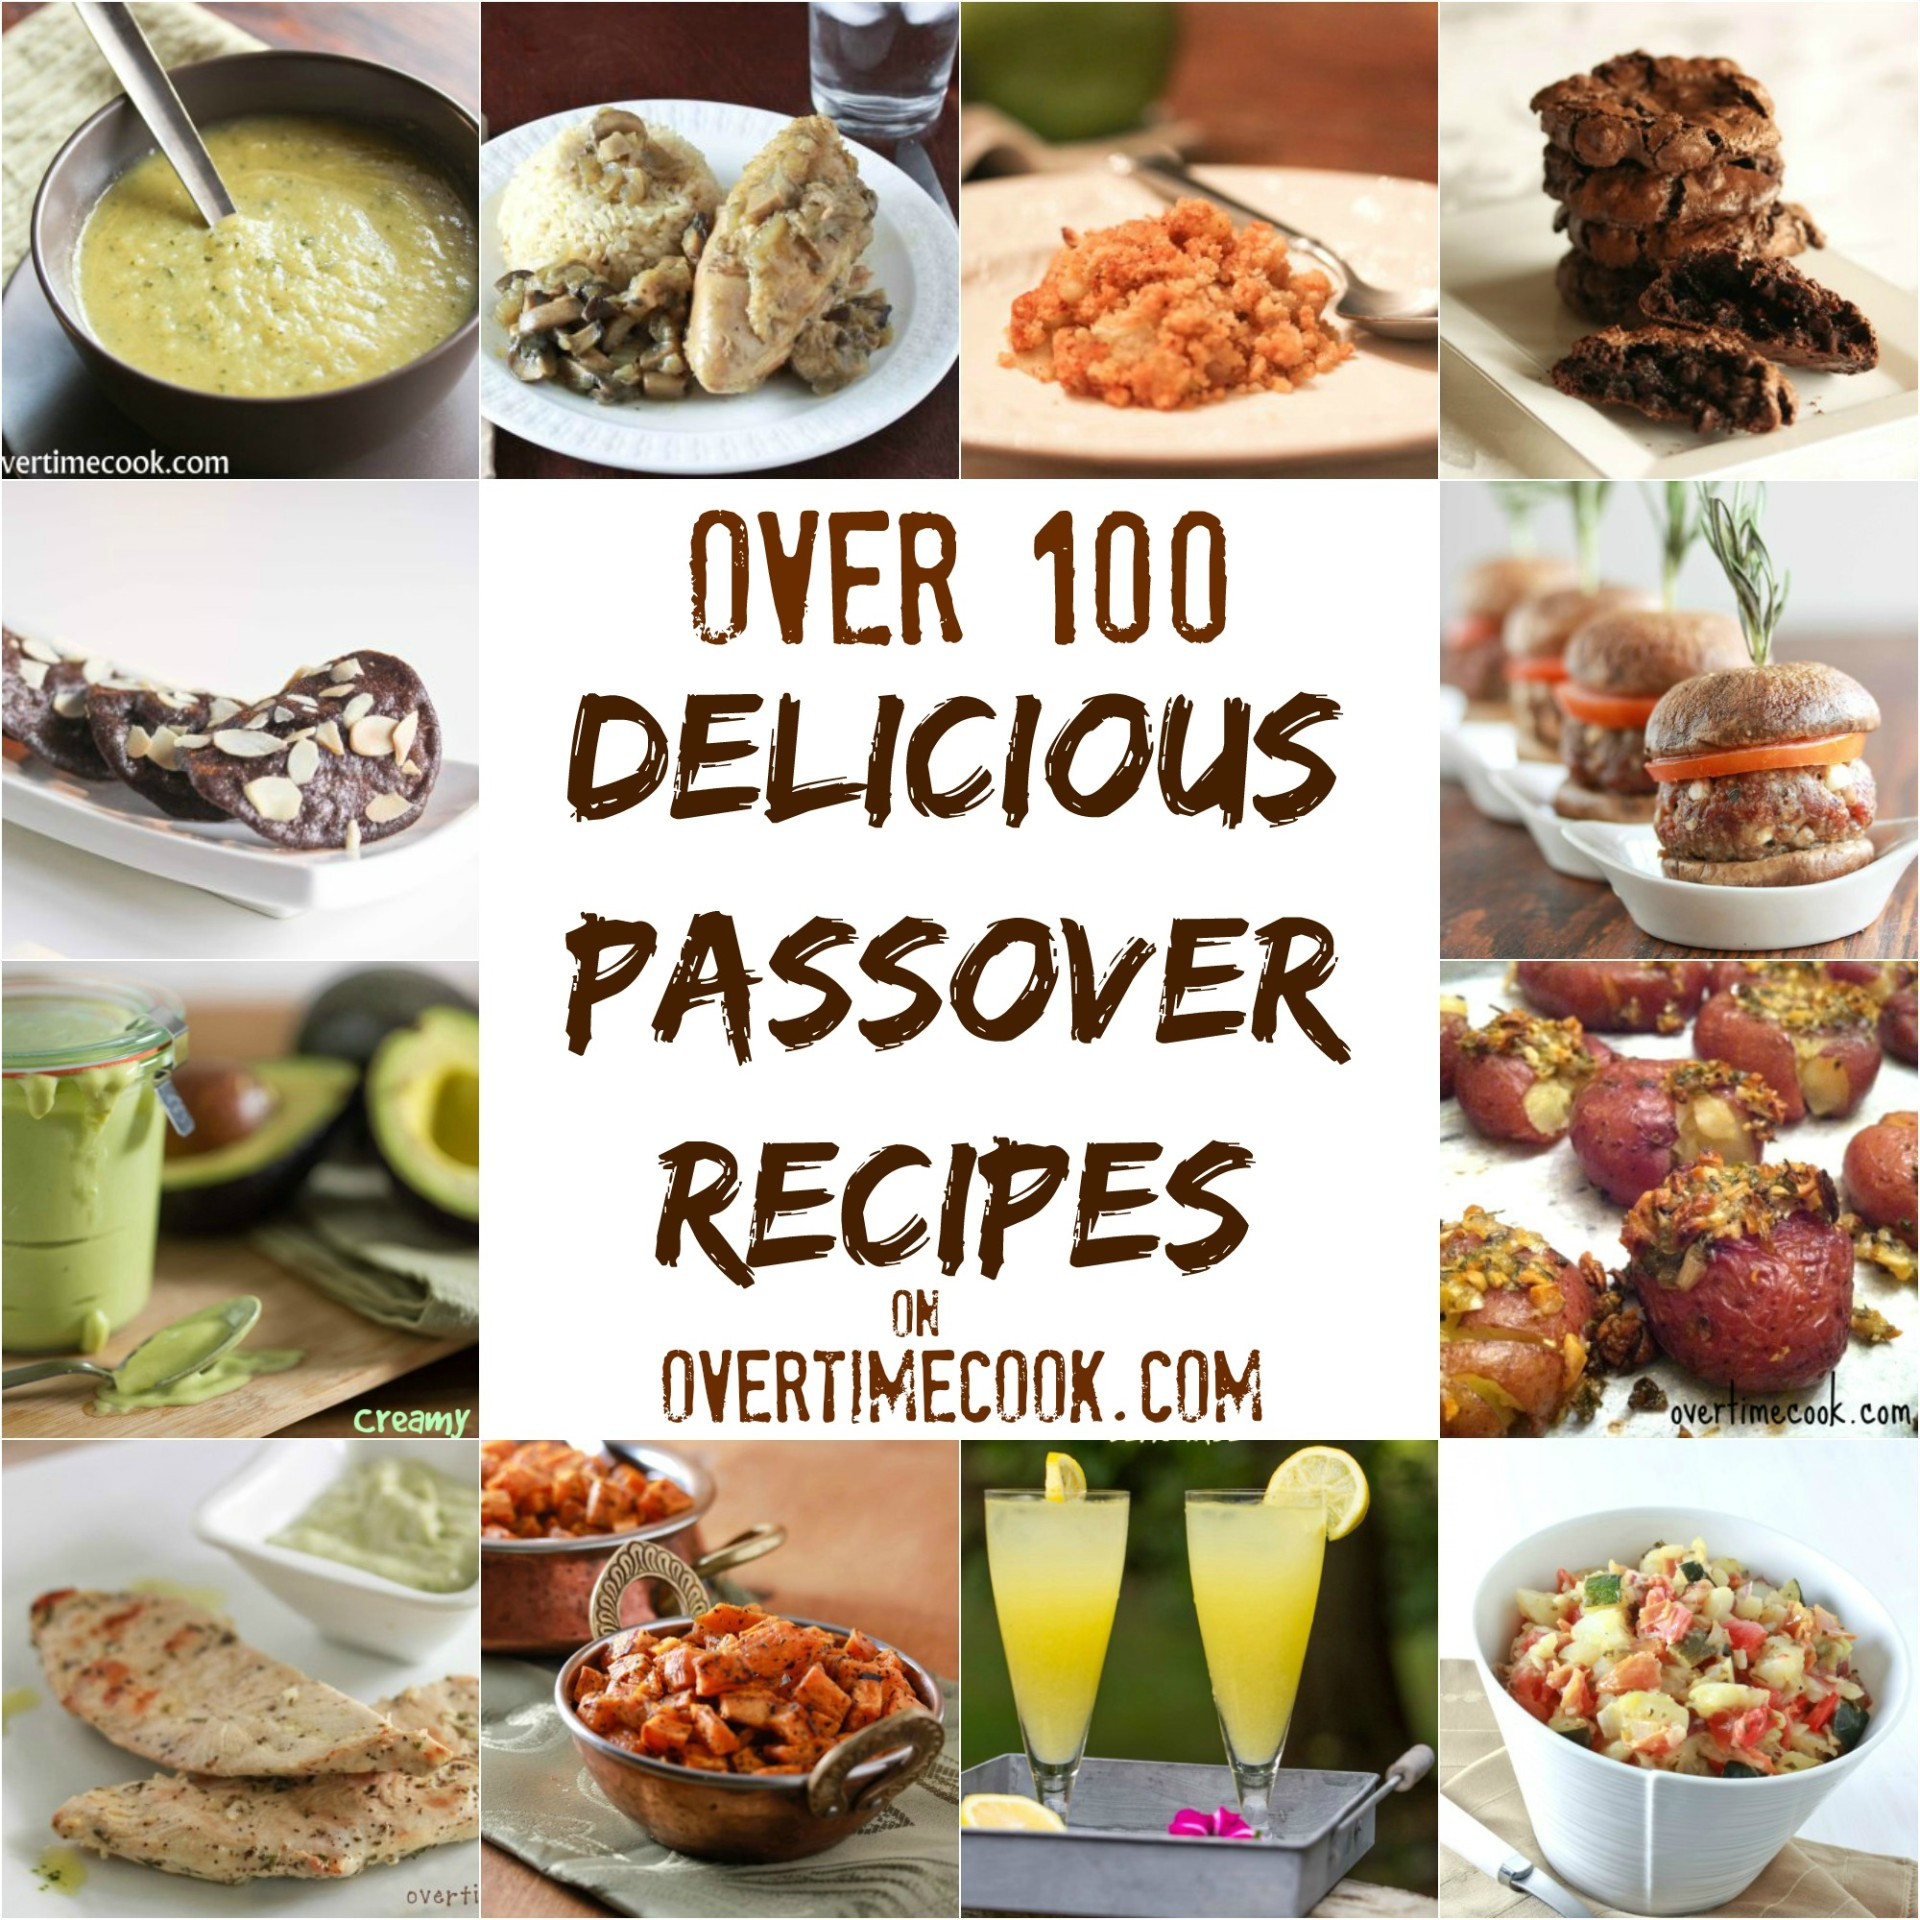 Jewish Passover Food
 Over 100 Delicious Passover Recipes Overtime Cook